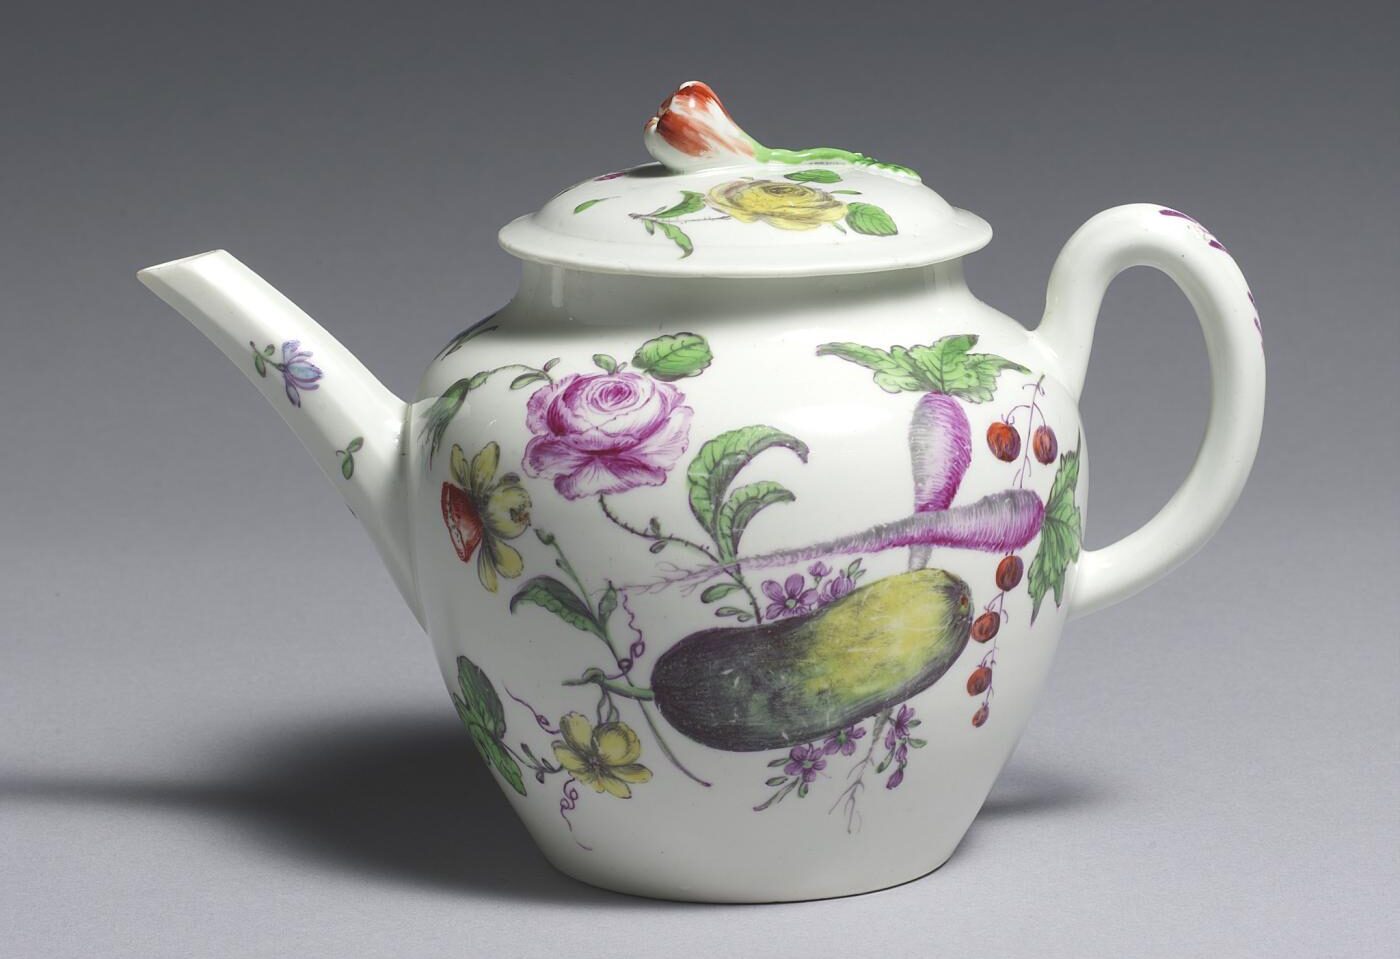 “Dr. Wall’s Triumph: Early Worcester Porcelain from the First Period of Production, 1751-1776, and Where It is Now!” by Paul Crane, Independent Historian and Consultant to the Brian Haughton Gallery, London